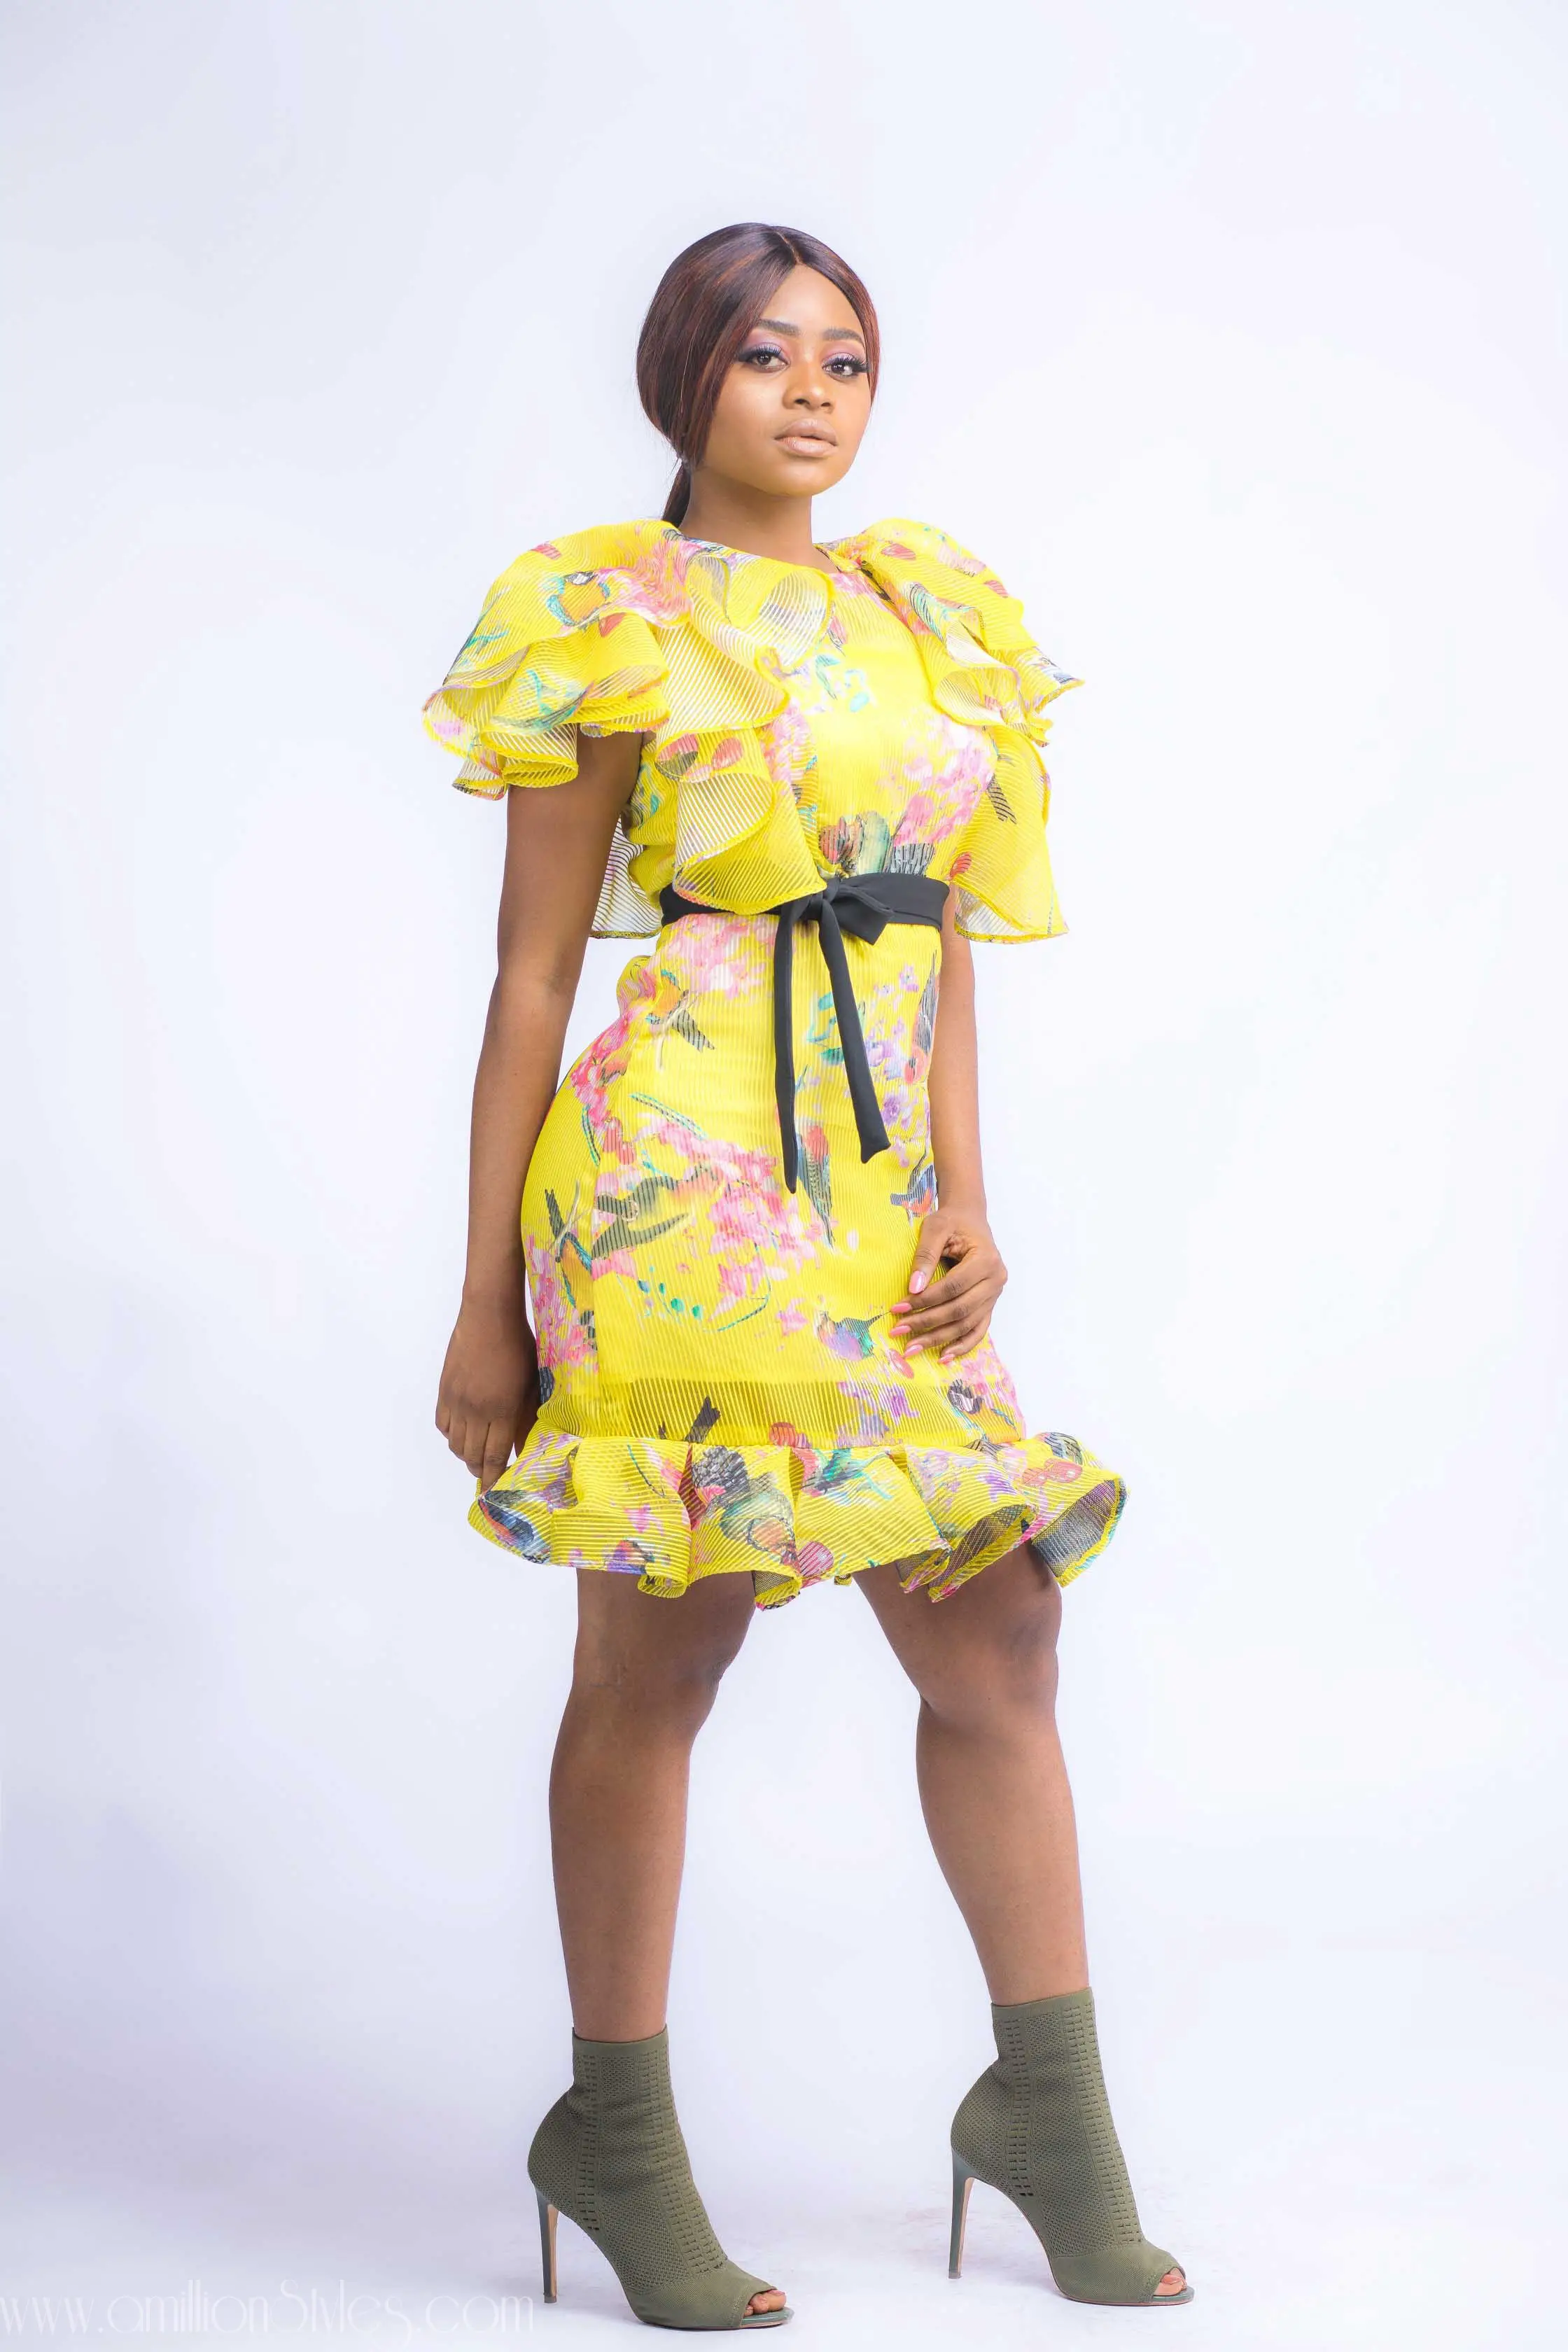 Comedian Bovi’s Wife Kristal Ugboma, Debuts With “Good Girl Code” Collection